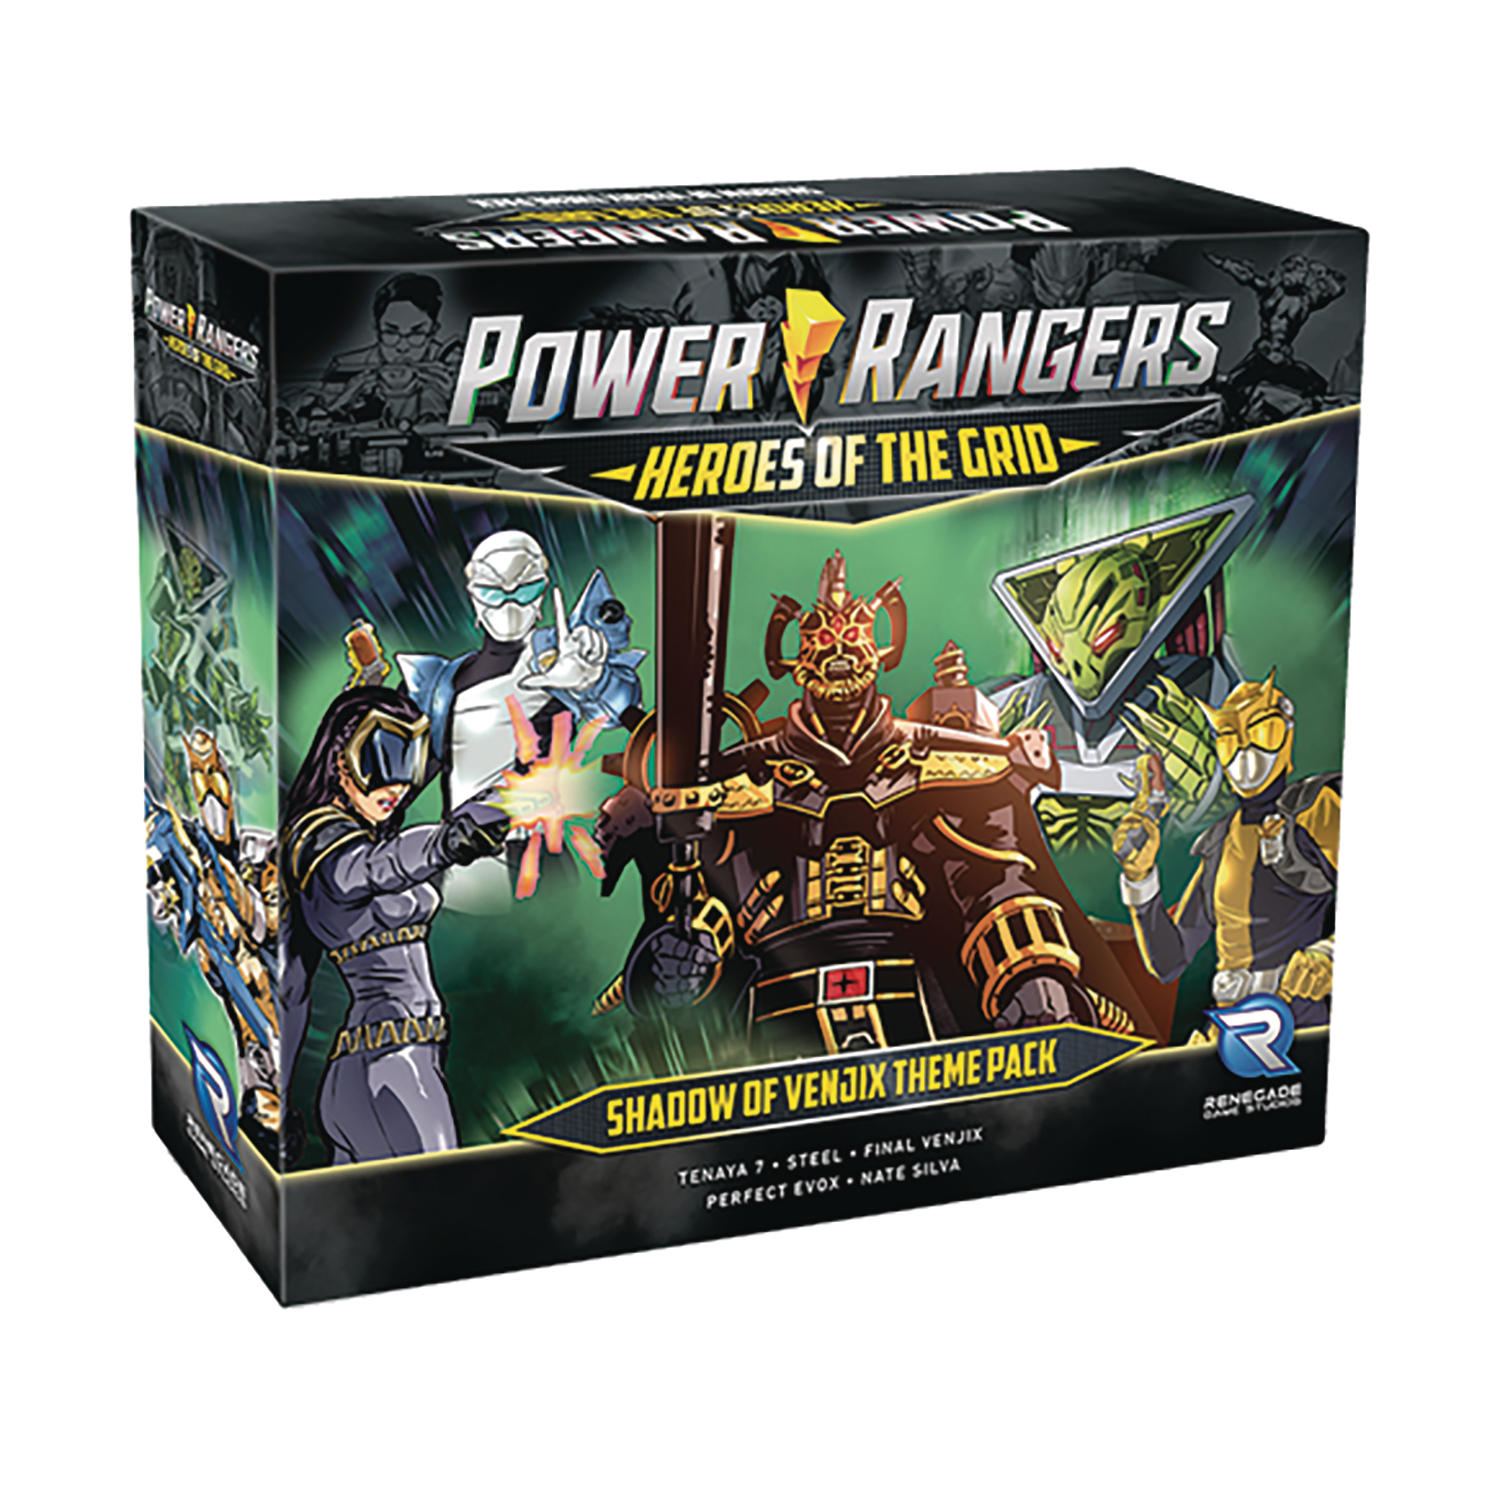 Power Rangers Heroes Grid Shadow of Venjix Theme Pack Expansion